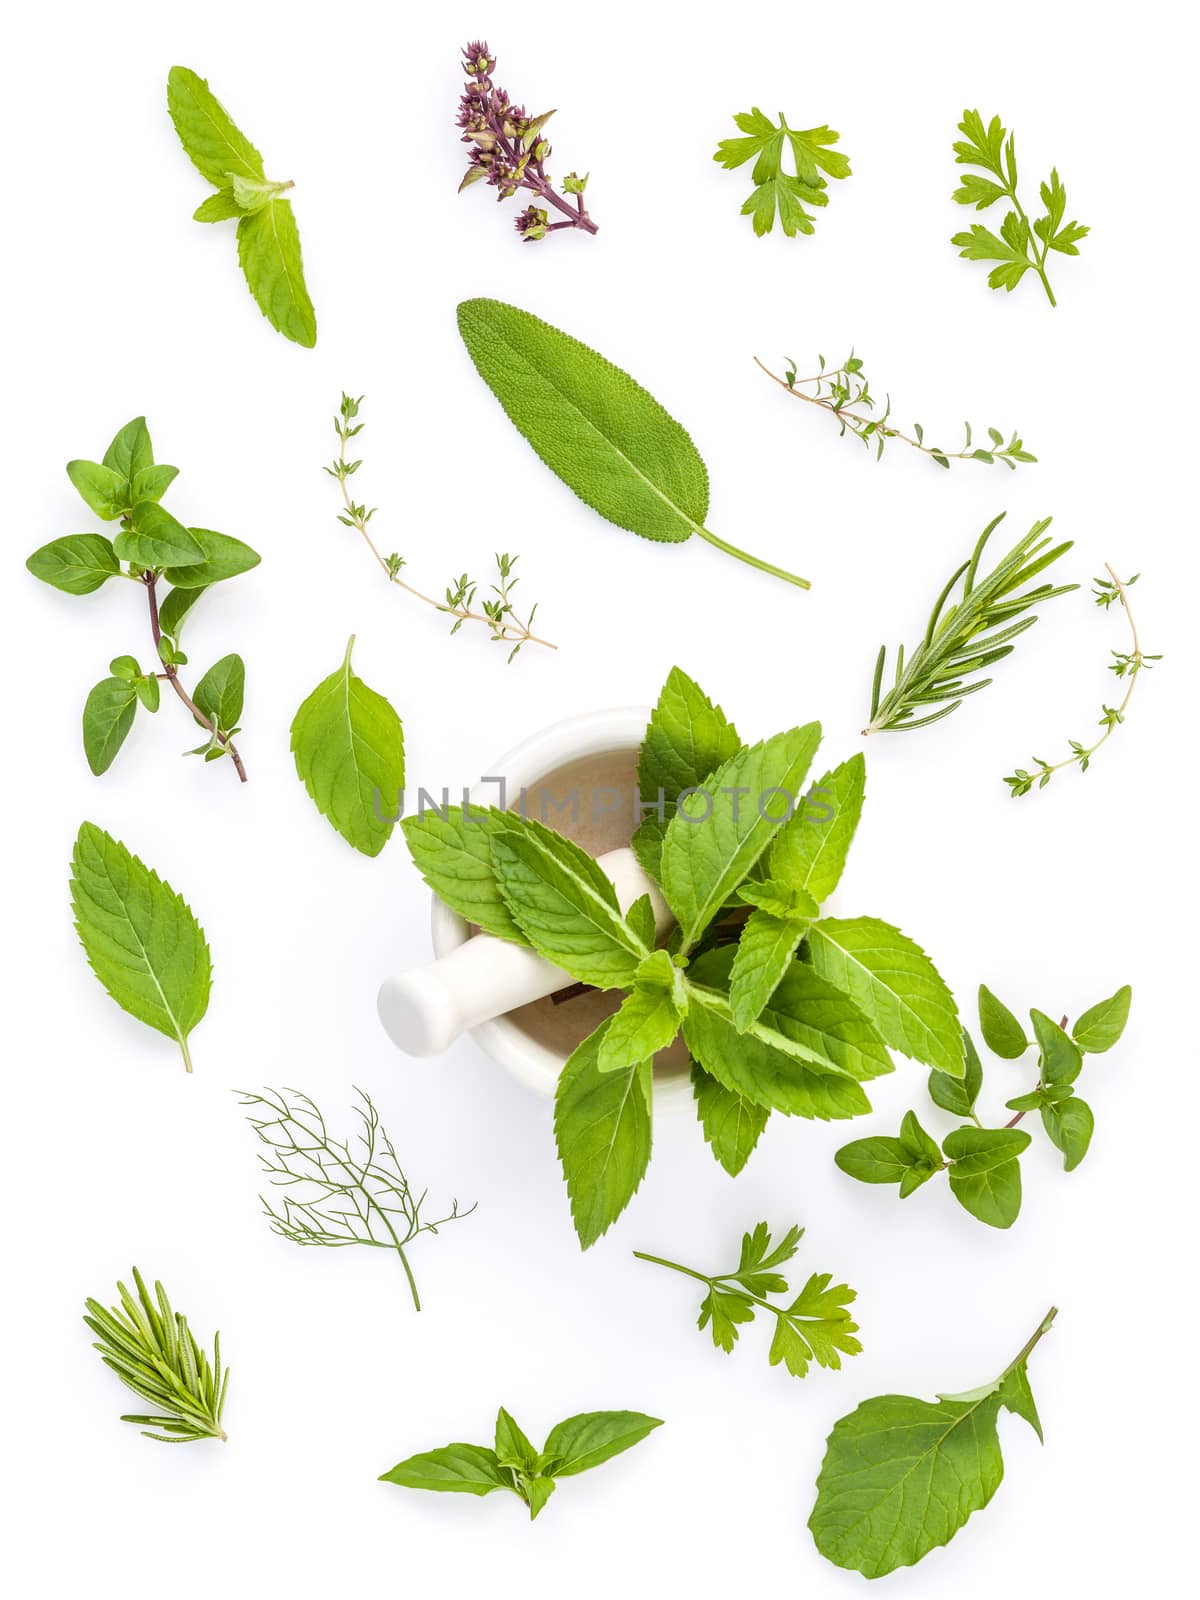 Various fresh herbs from the garden holy basil , basil flower ,rosemary,oregano, sage and thyme ,fennel ,peppermint and mustard leaves with white mortar isolated on white background.
